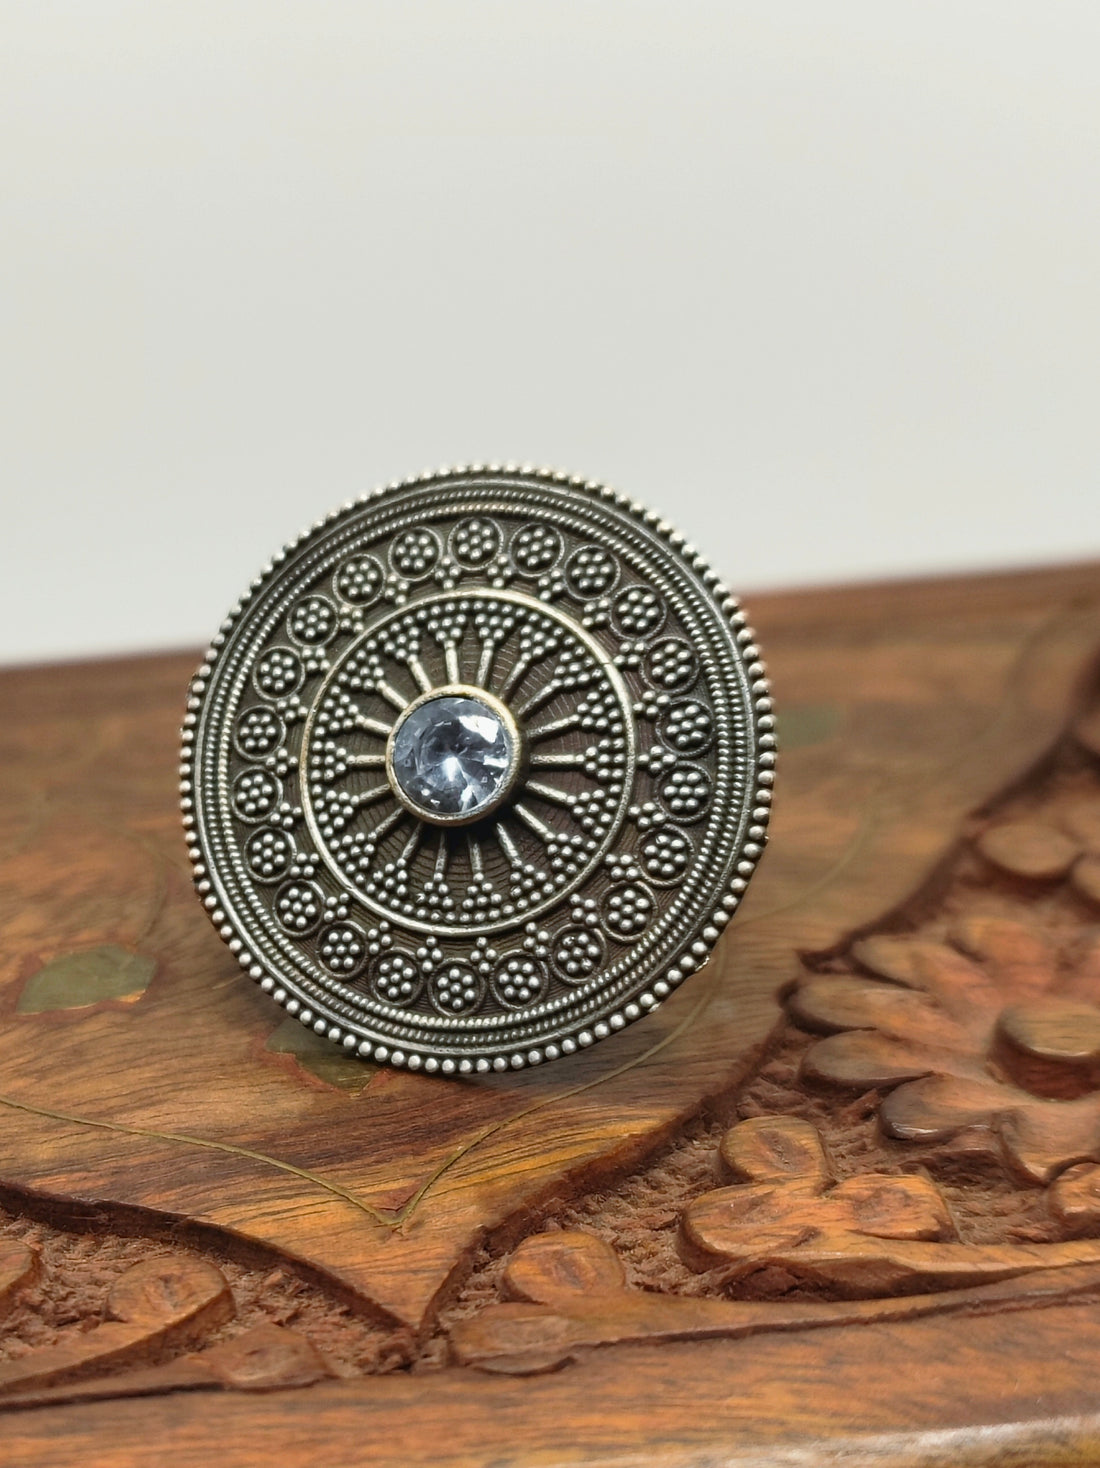 Vrishti Antique Silver Finish Ring for festive occasions | for traditional look | for office Indian wear - Mrigaya India